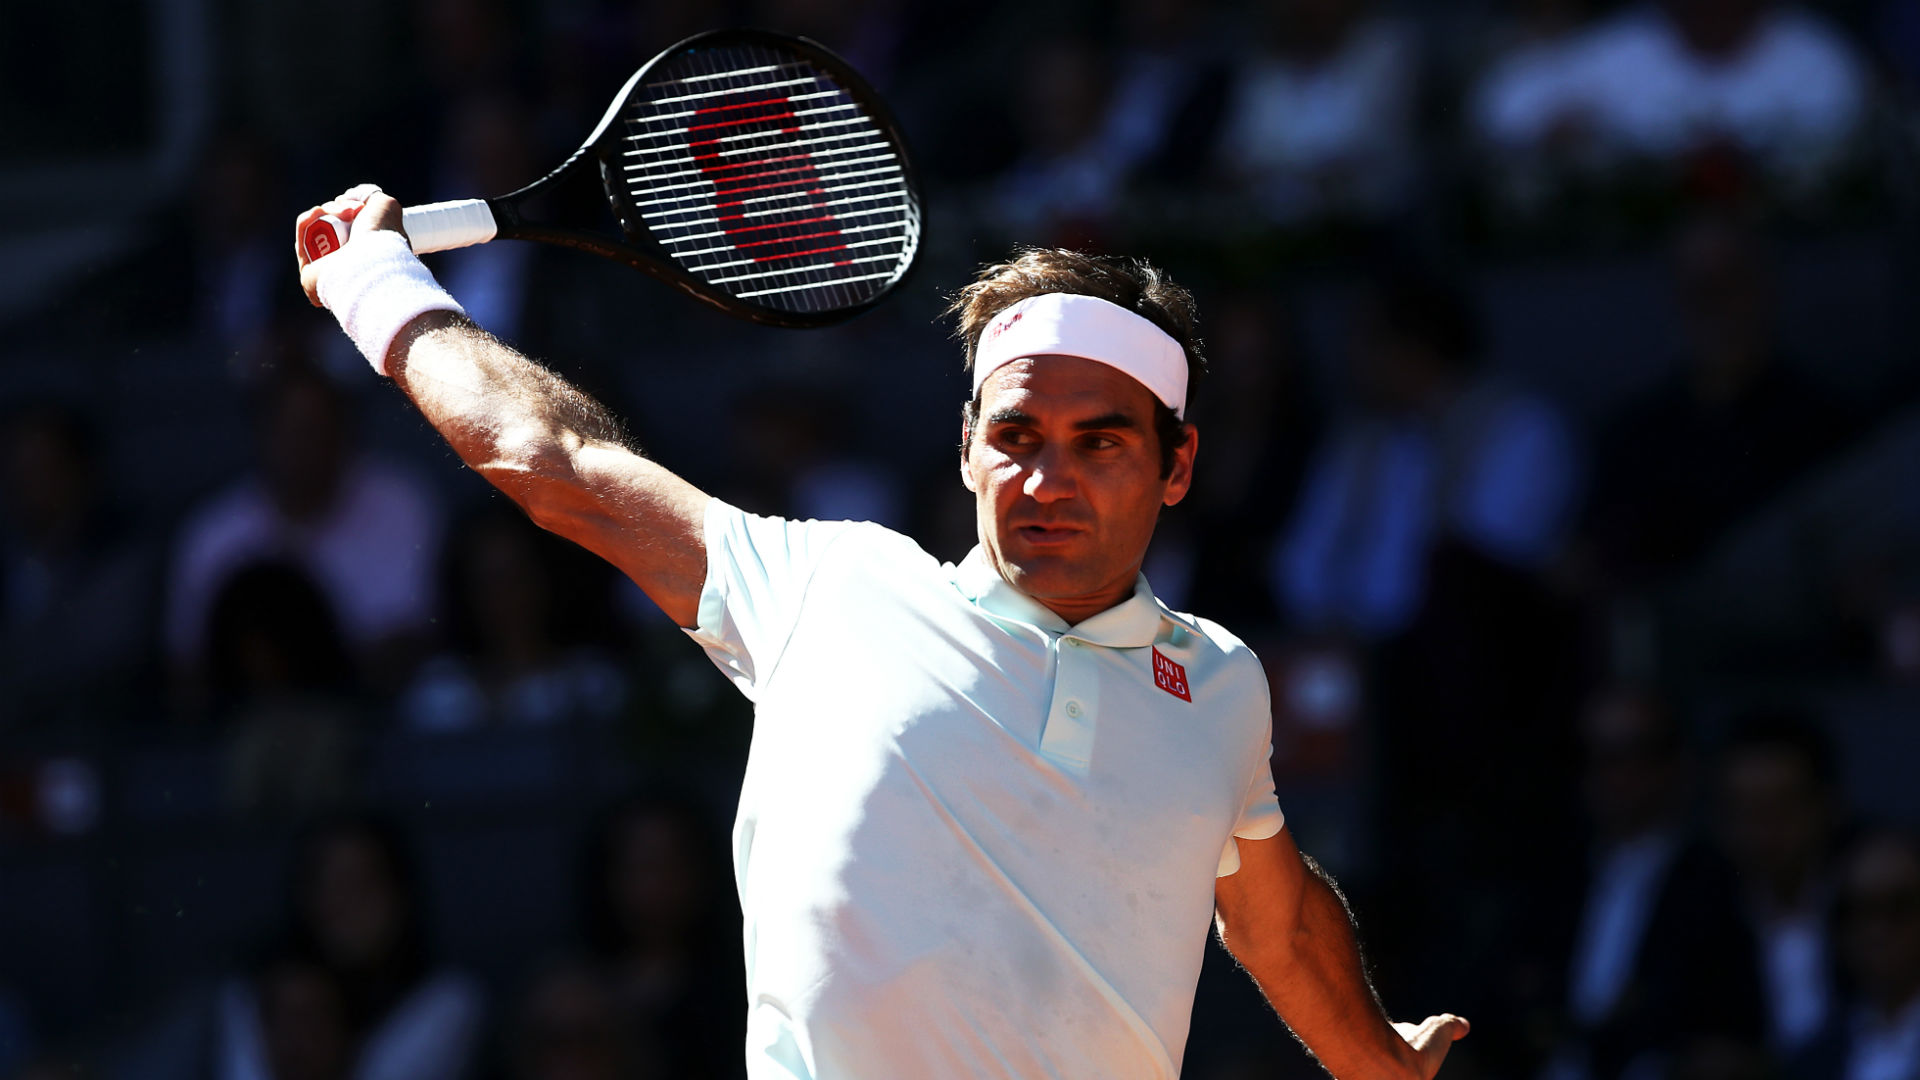 Roger Federer will contest the French Open for the first time since 2015 and there are no expectations on the 20-time major winner.